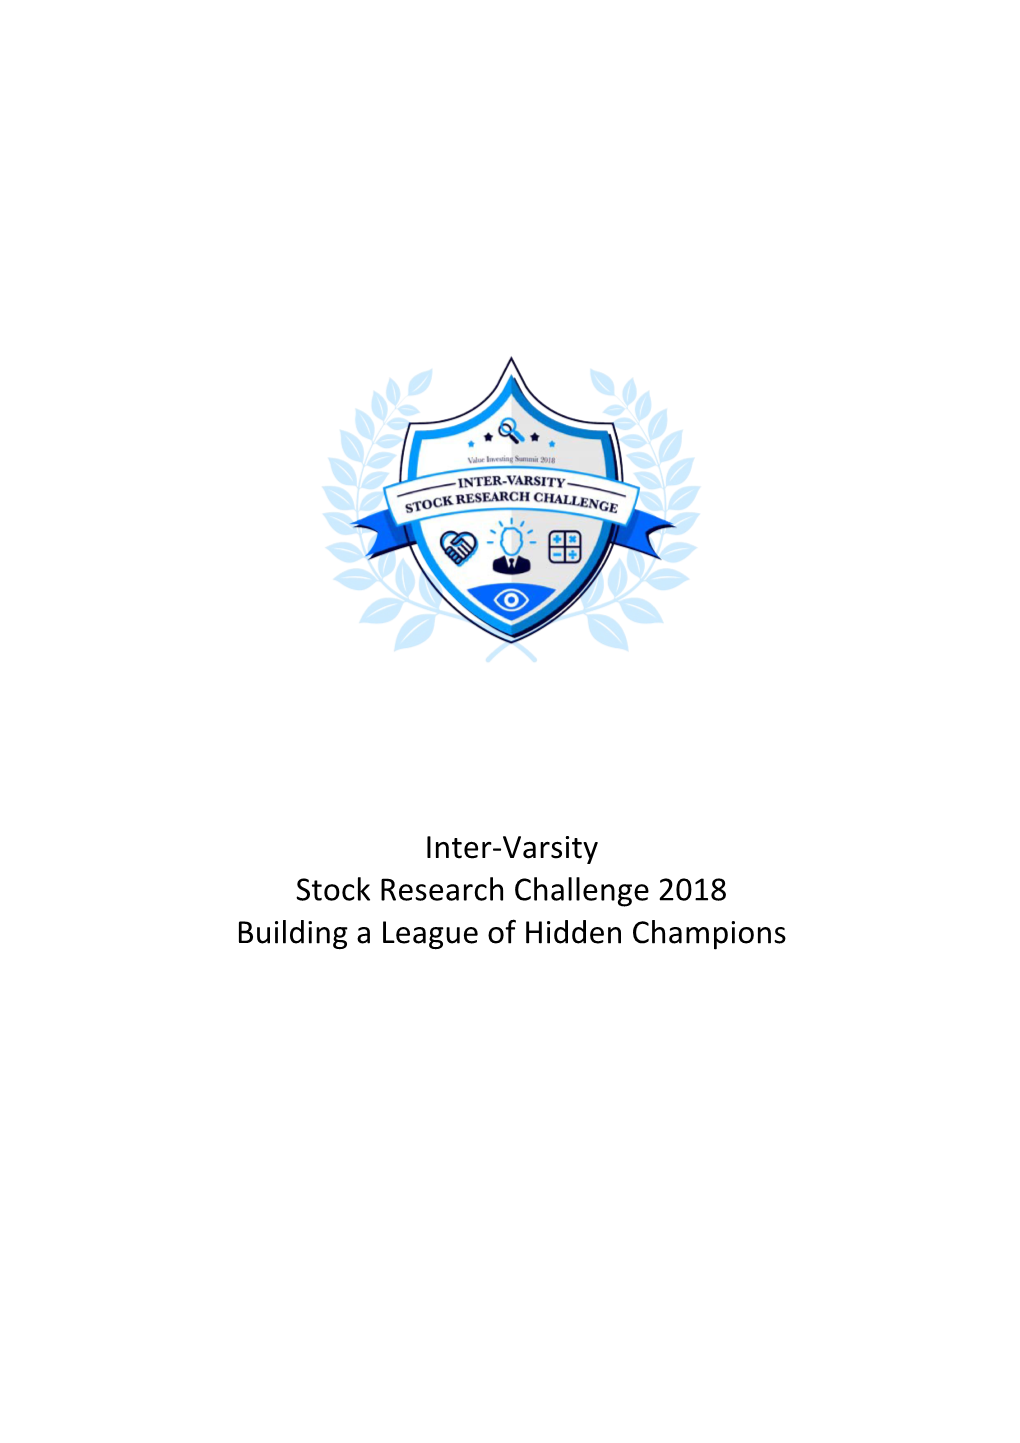 Inter-Varsity Stock Research Challenge 2018 Building a League of Hidden Champions